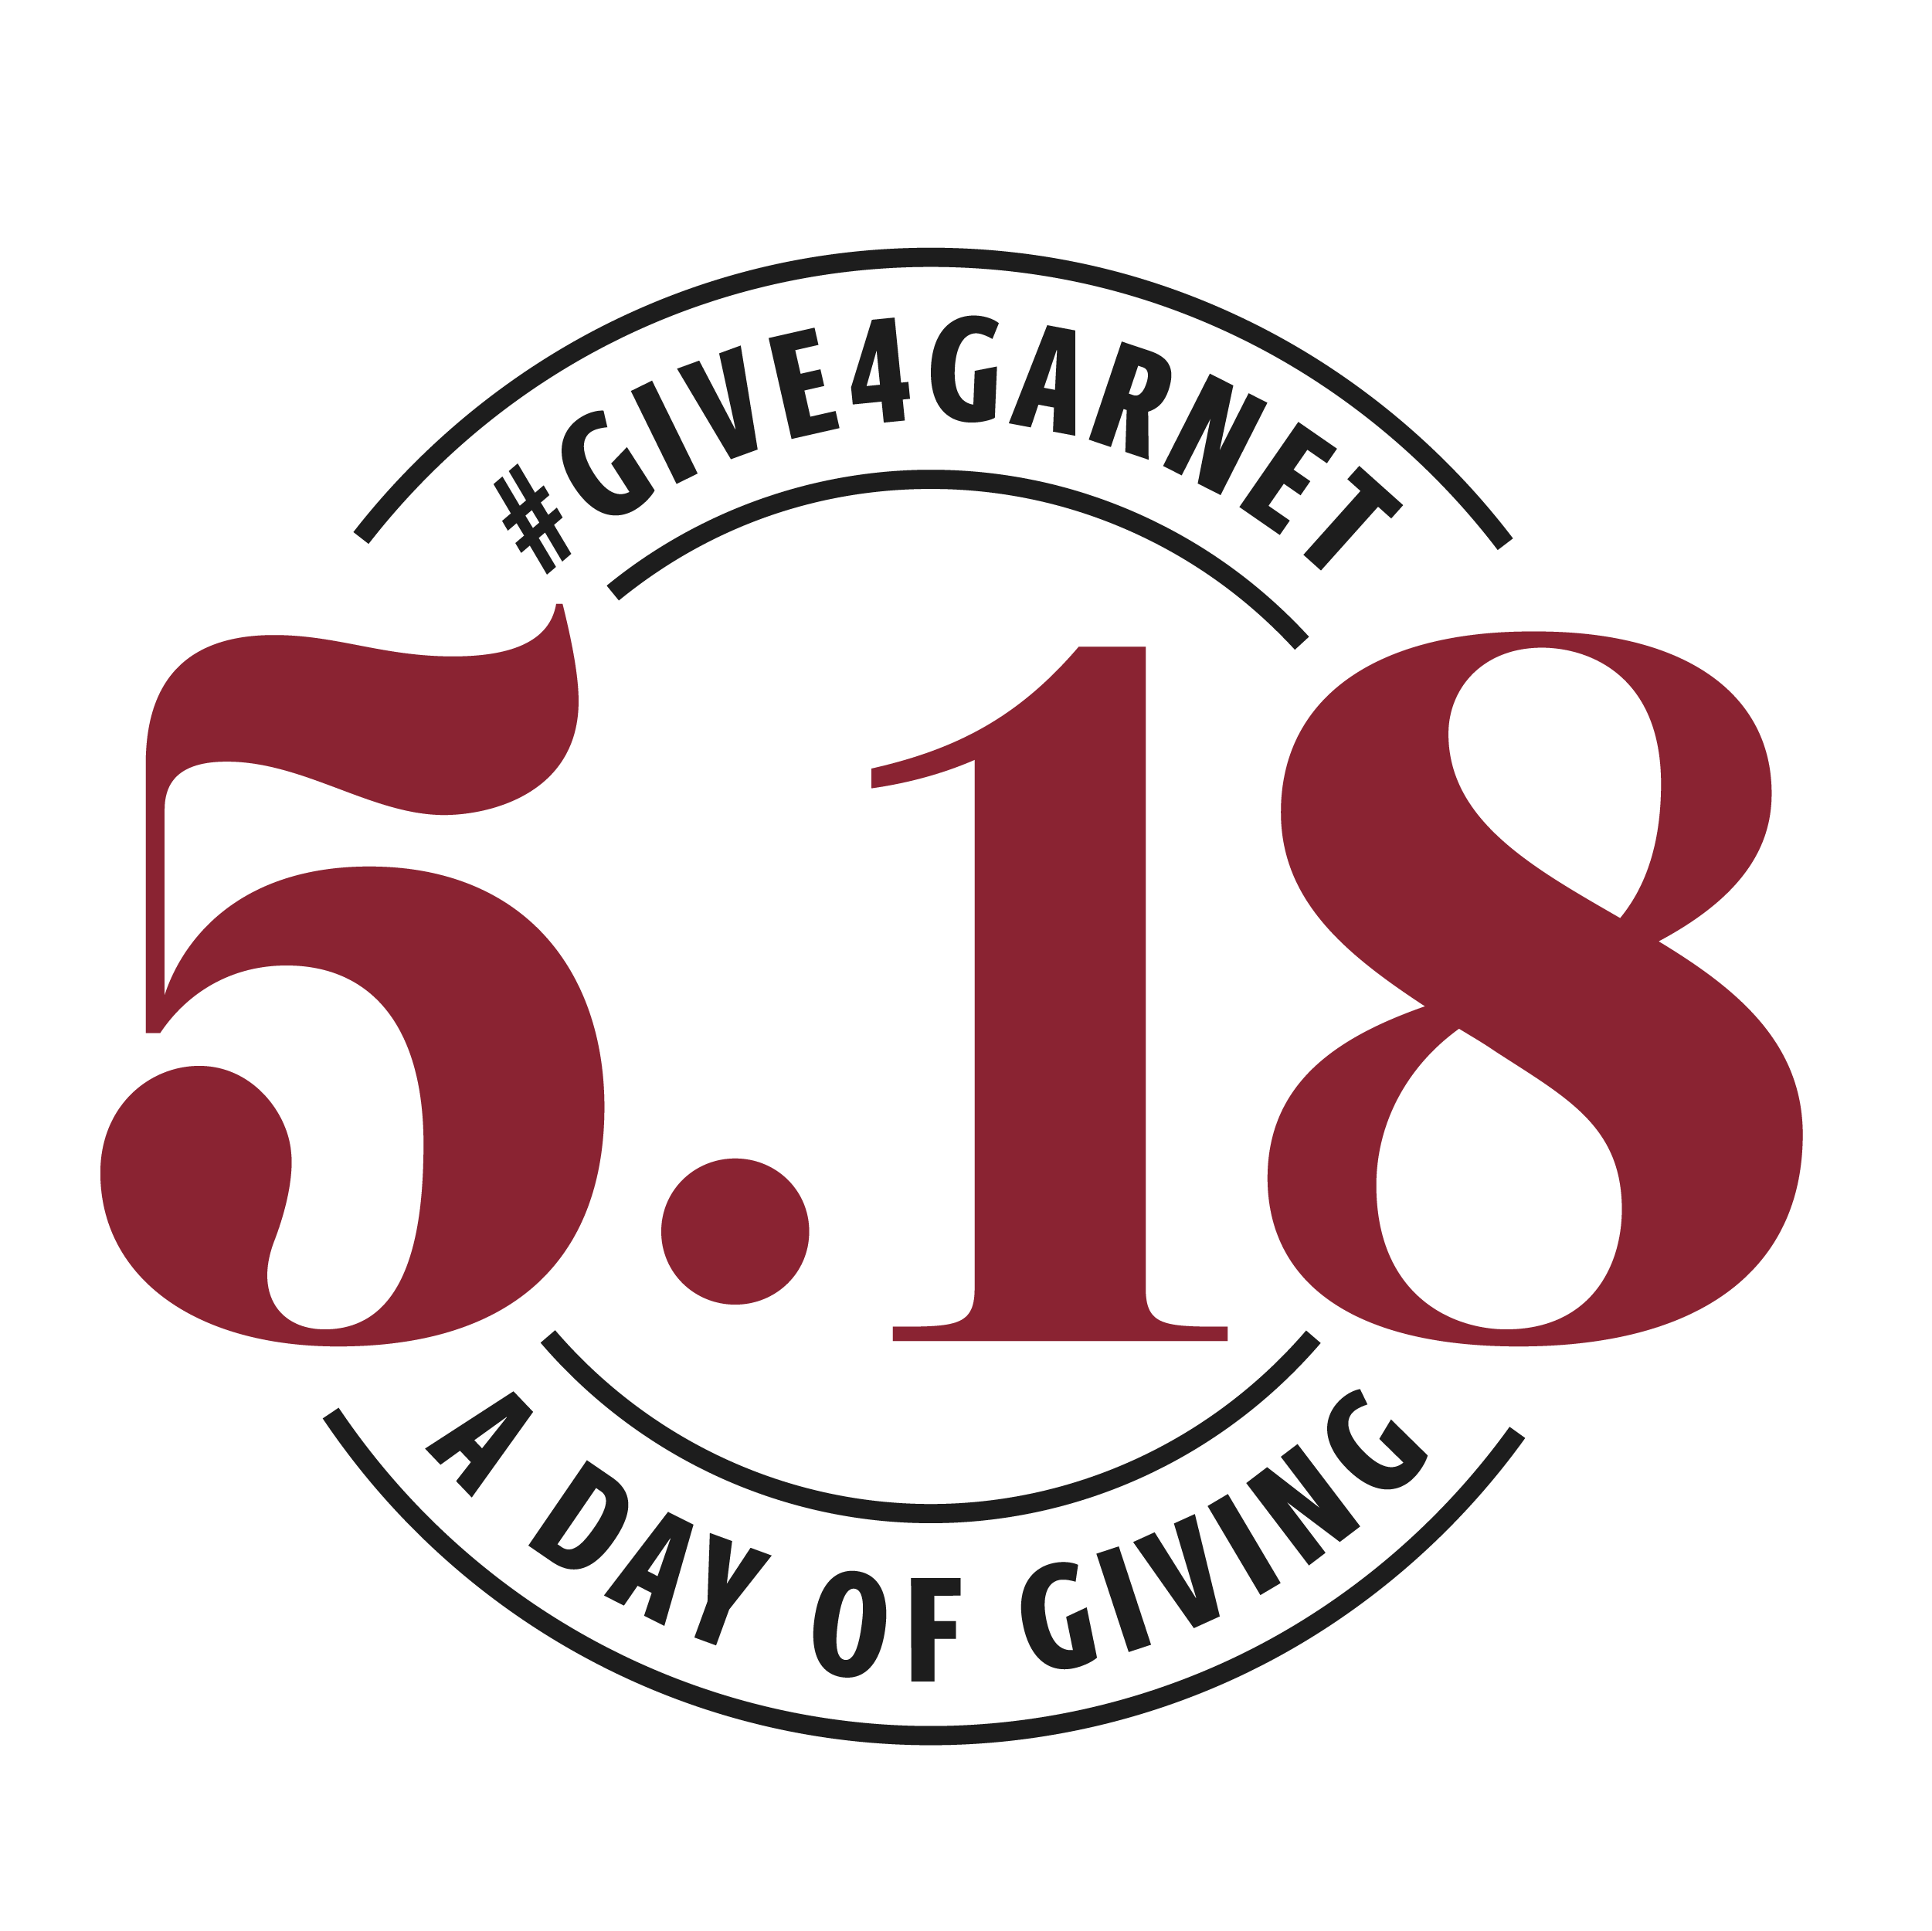 A Day of Giving. May 18, 2022 #Give4Garnet